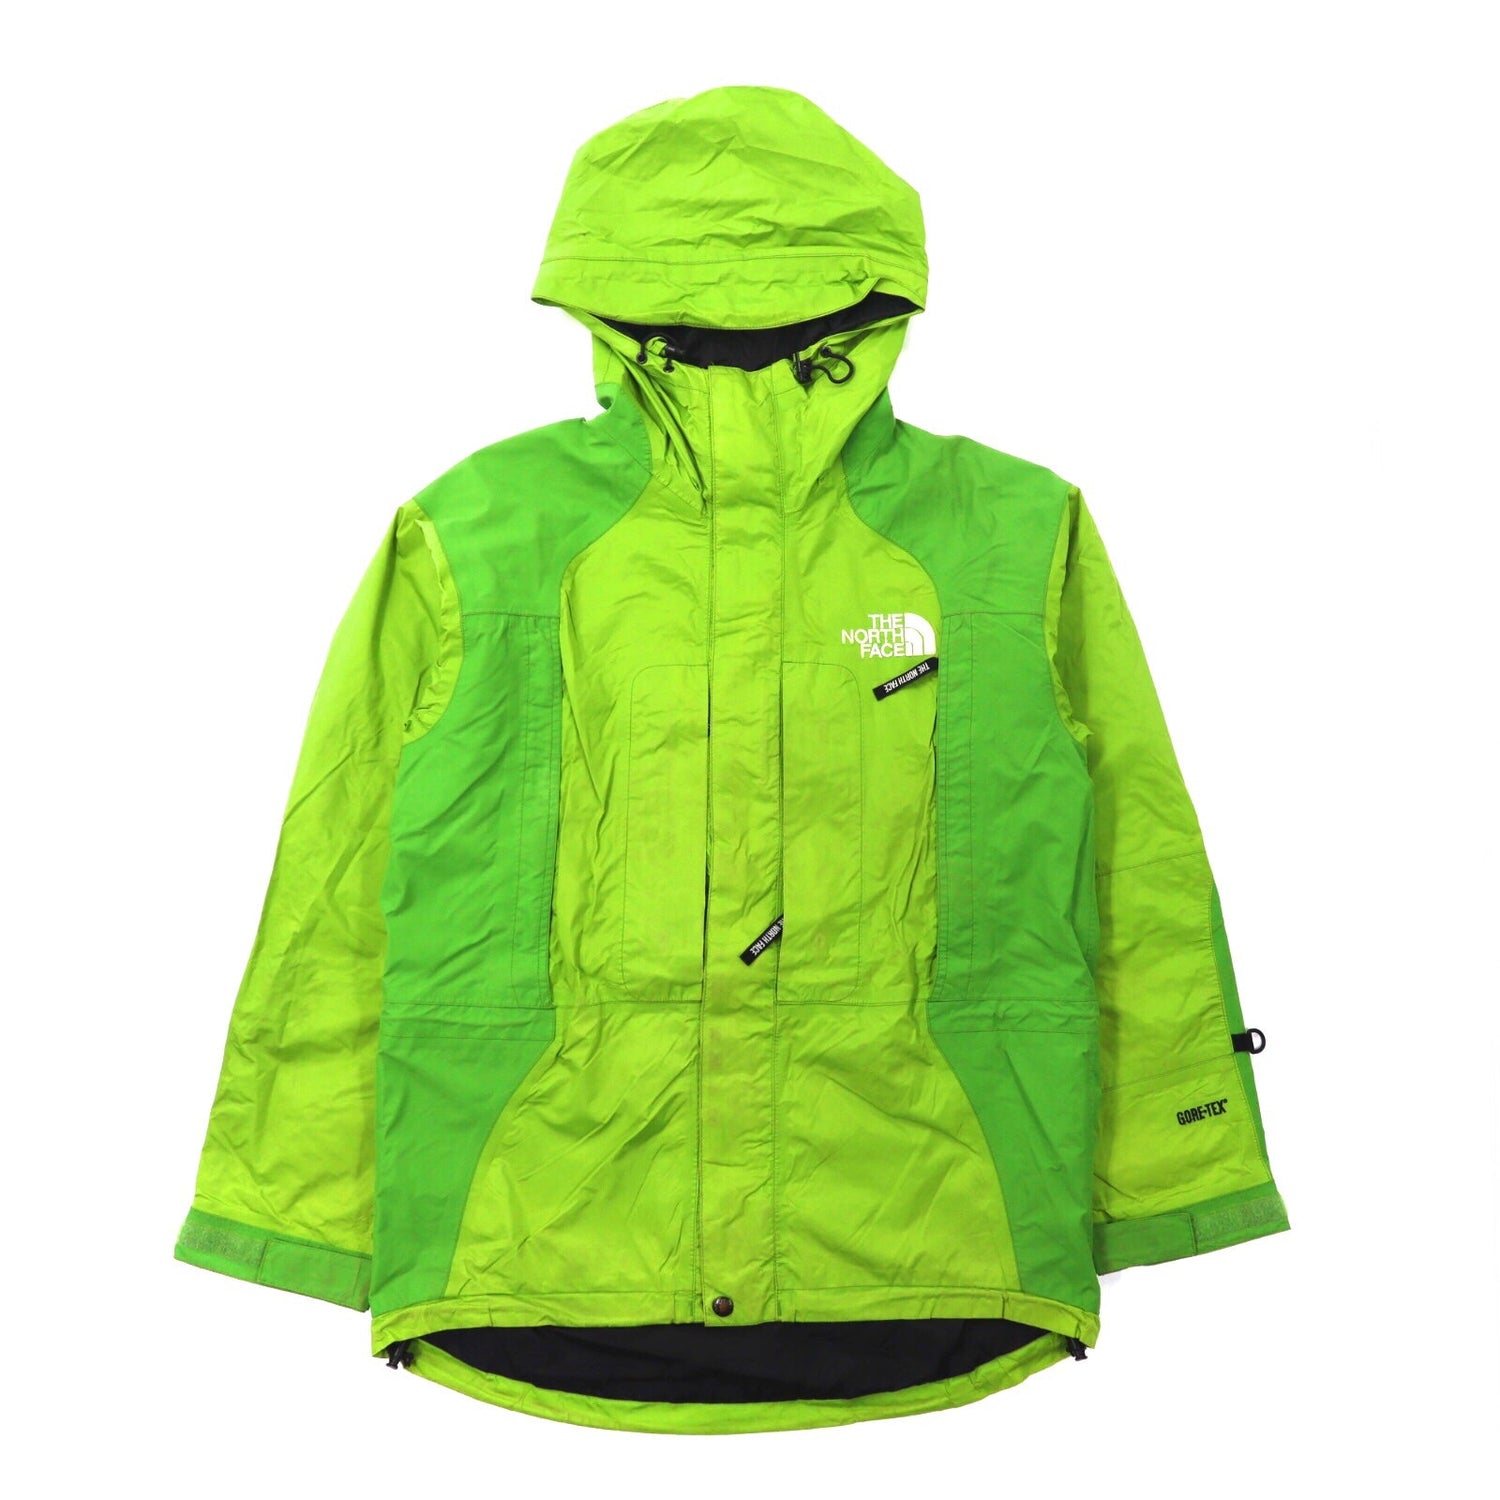 THE NORTH FACE マウンテンパーカー S グリーン GORE-TEX-THE NORTH FACE-古着